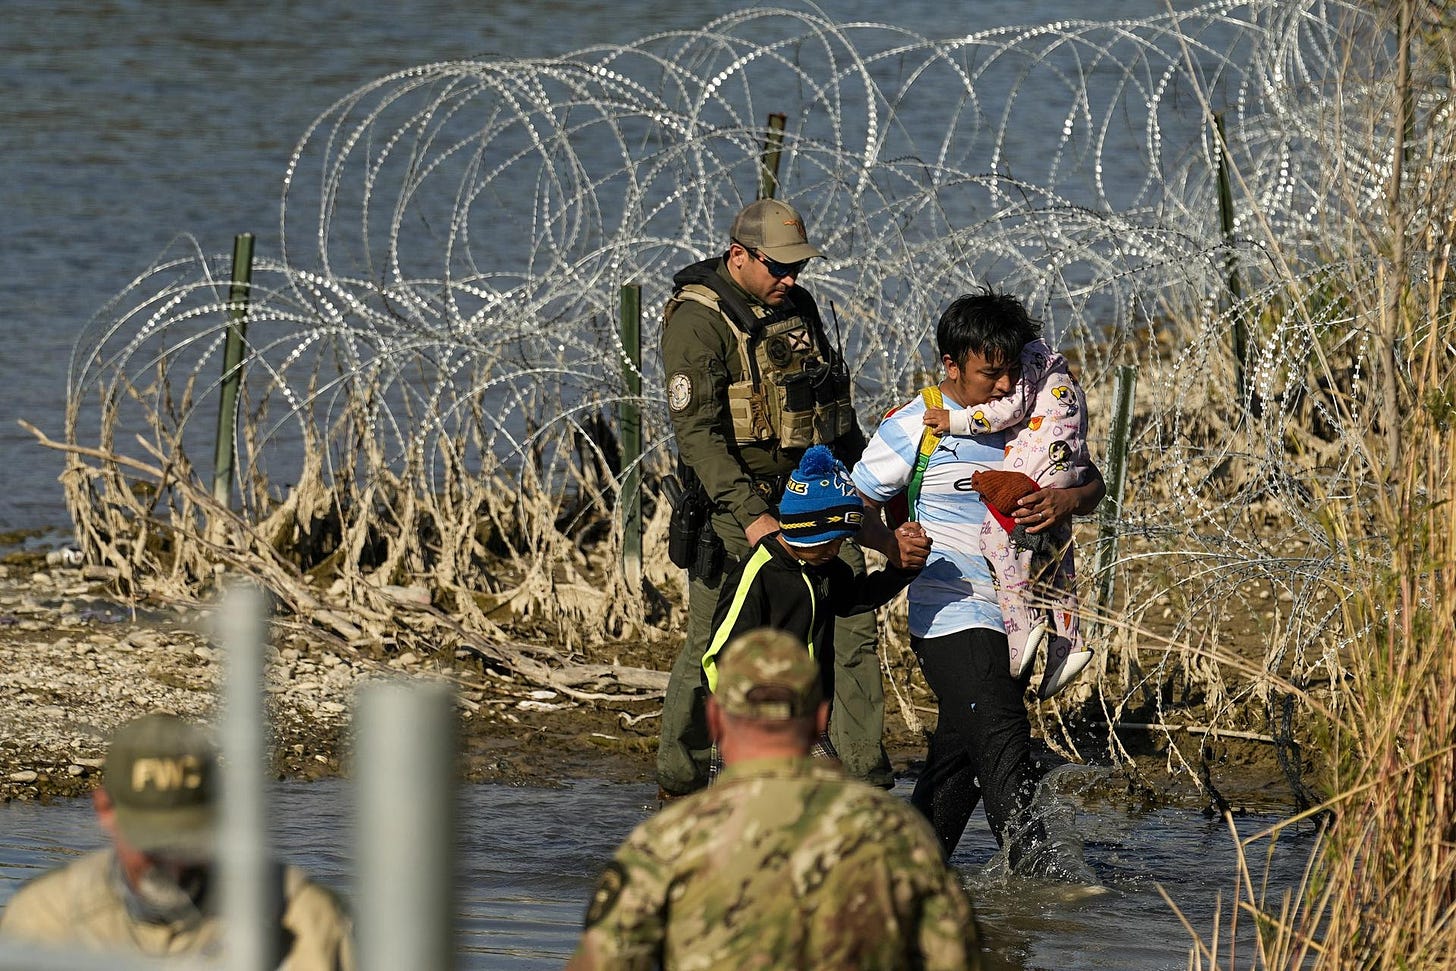 A migrant and his children are taken into custody in Texas.